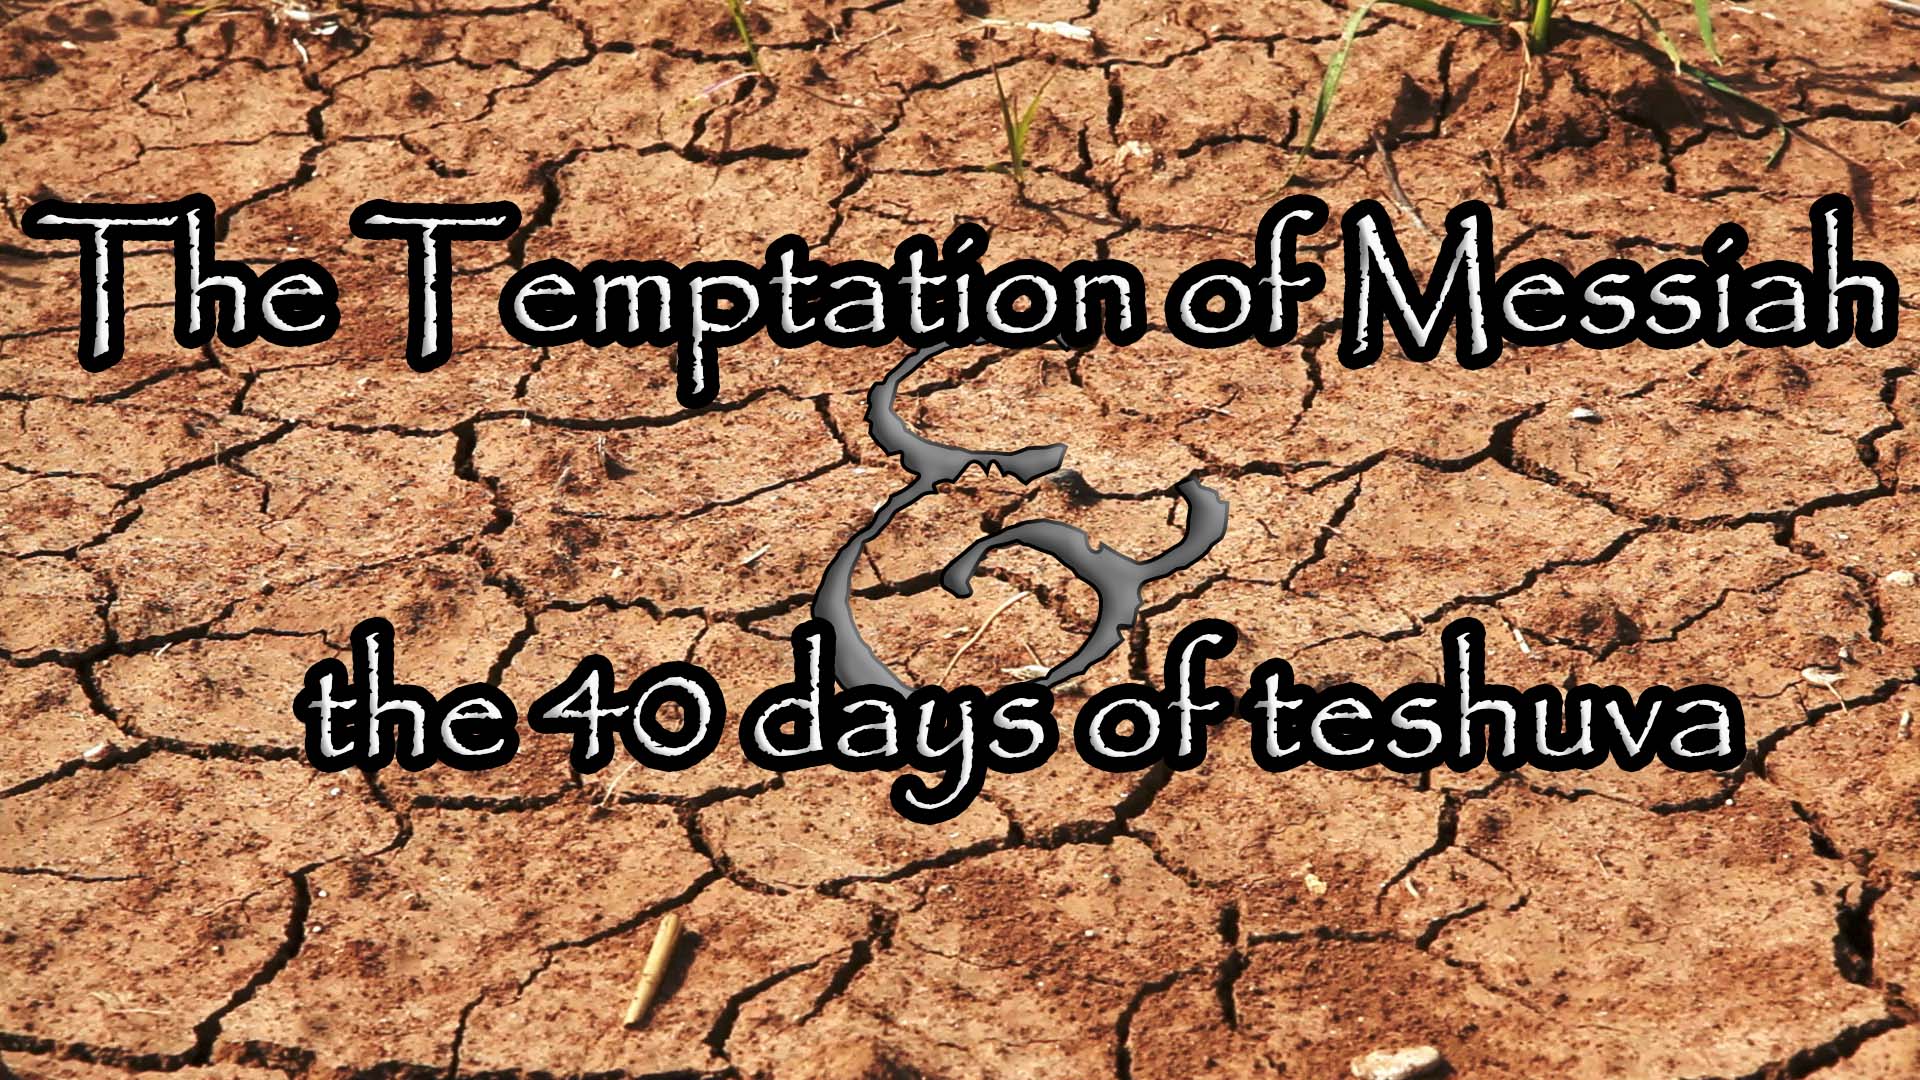 The Forty Days of Teshuva and the Temptation of Messiah